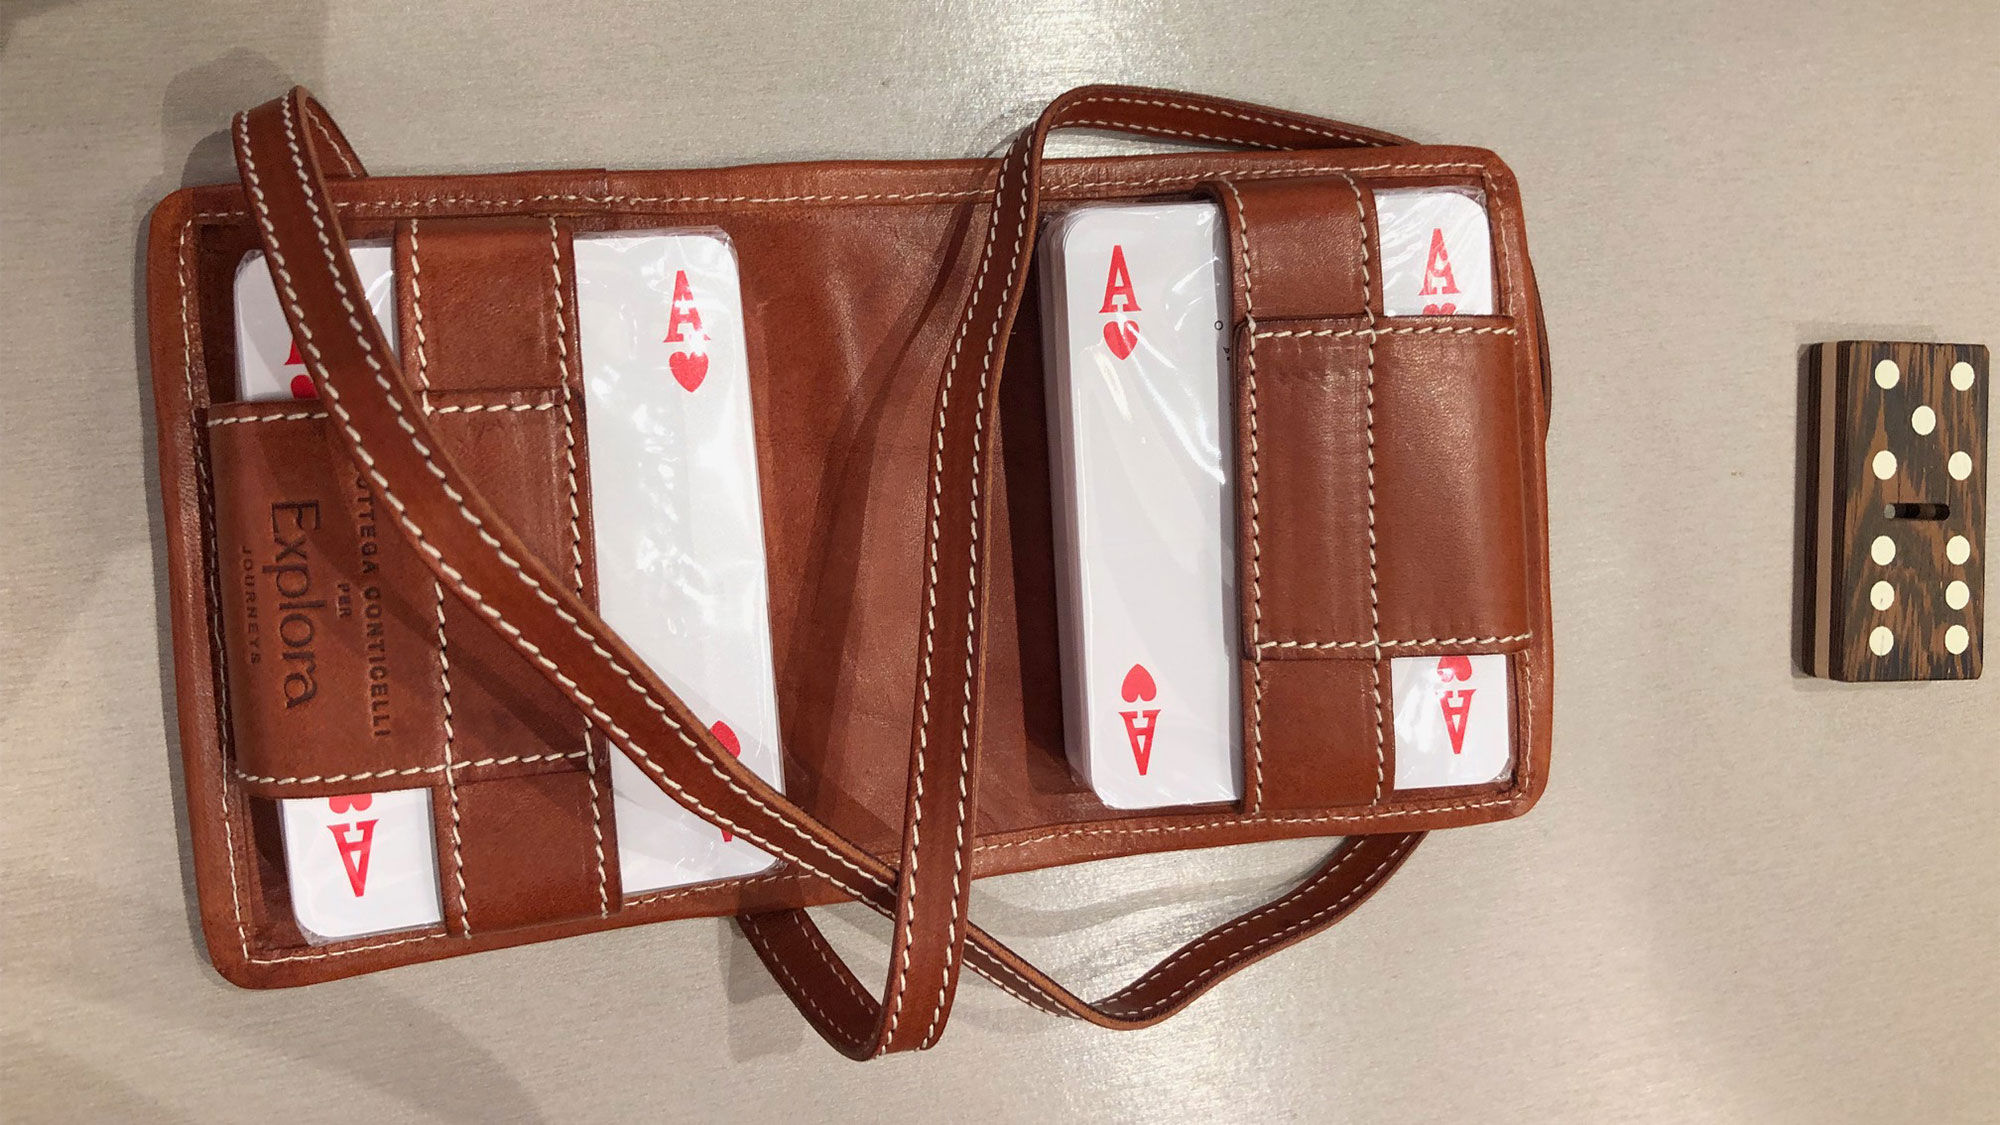 A leather carrying case for playing cards and a crafted hardwood domino were two items showcased in the "Artistry Beyond Boundaries" enrichment talk.